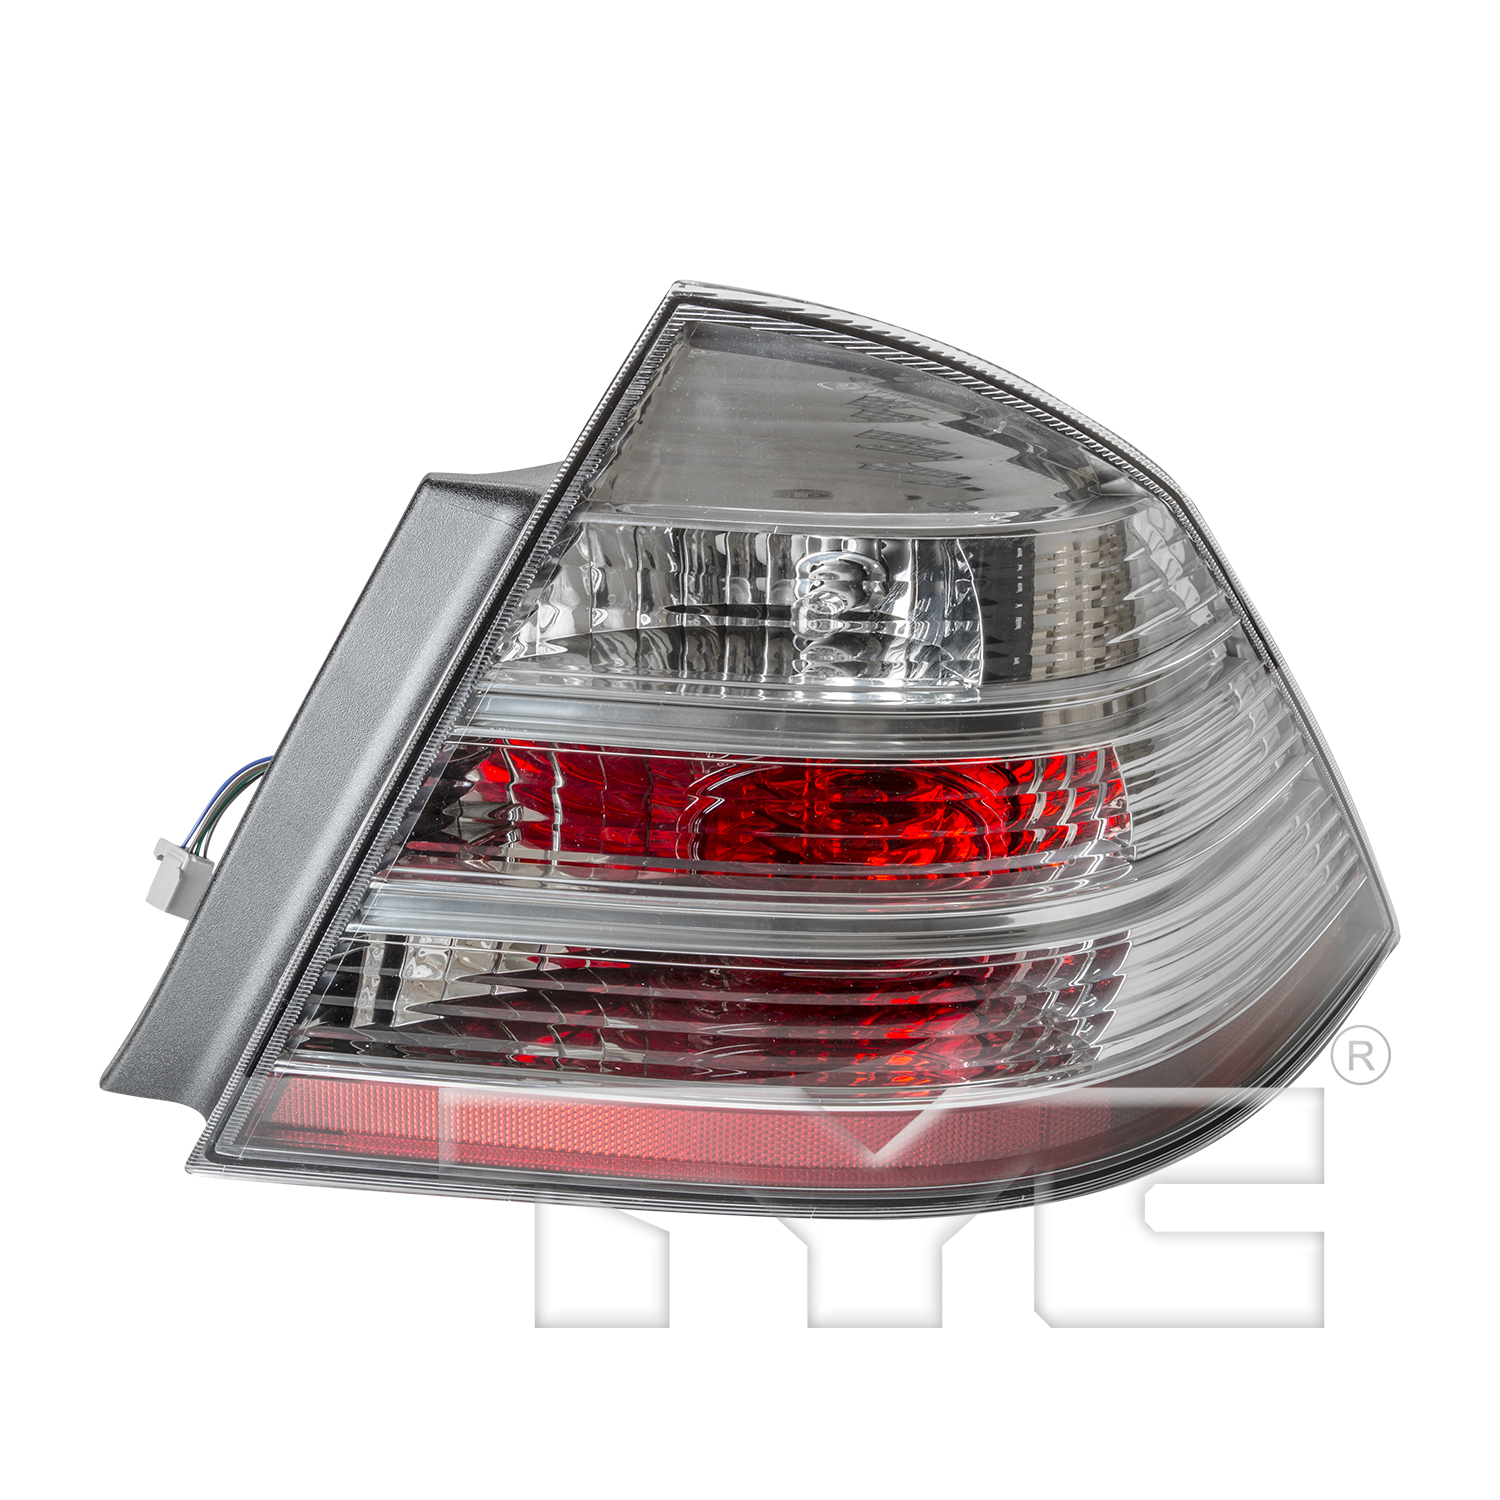 Aftermarket TAILLIGHTS for FORD - TAURUS, TAURUS,08-09,RT Taillamp lens/housing